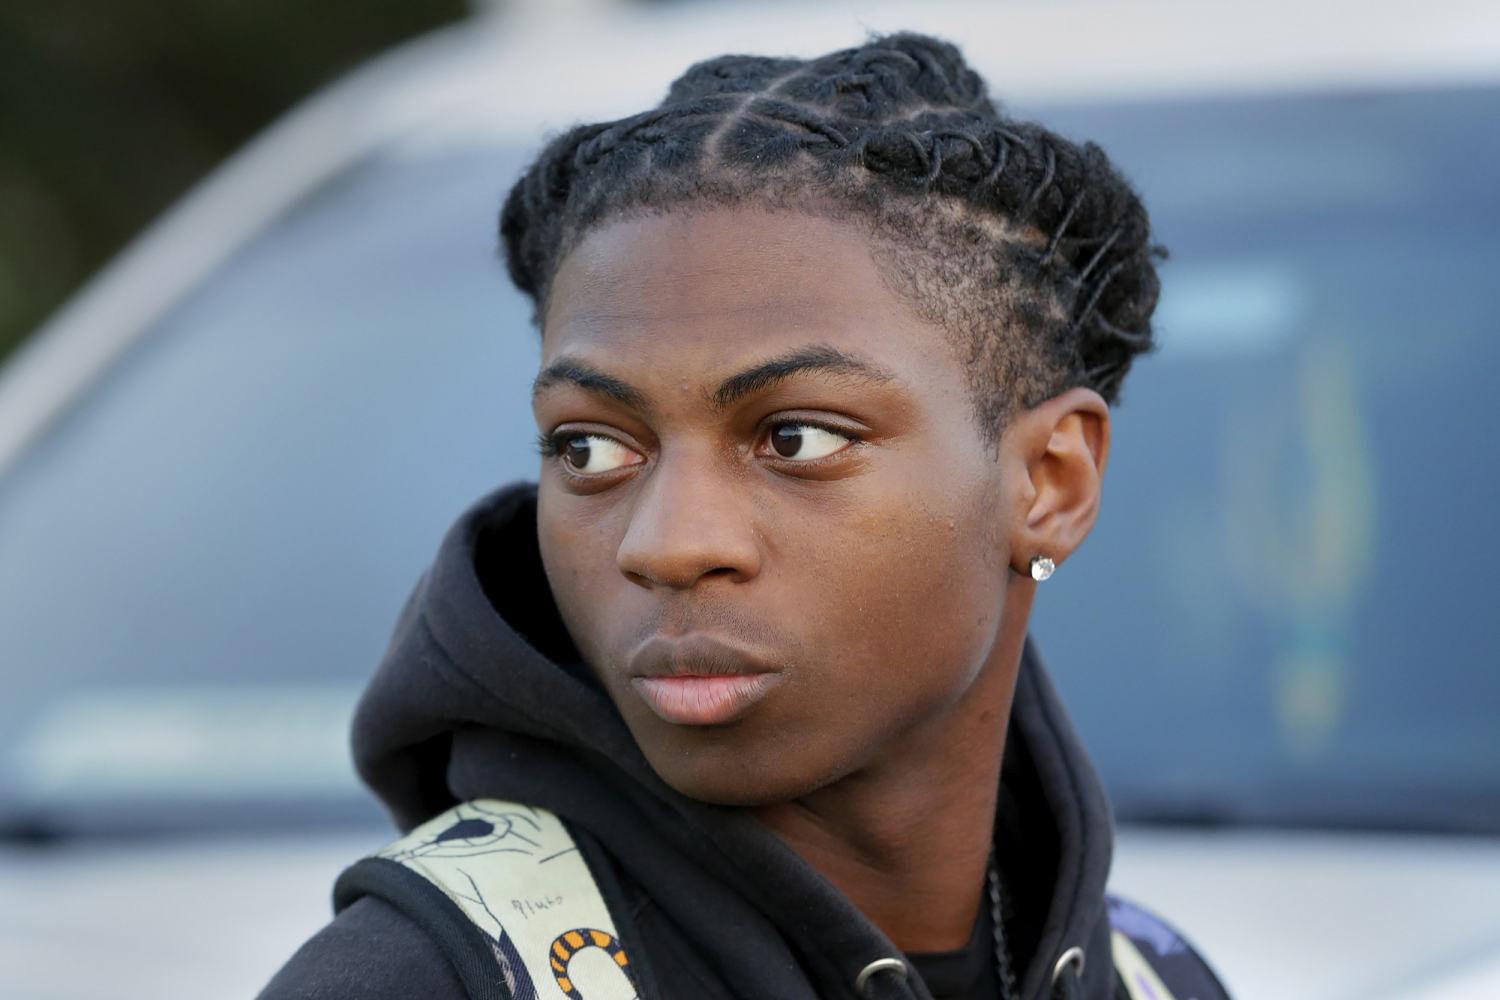 Texas school hair policy that left Black teen suspended for months is lawful, judge rules